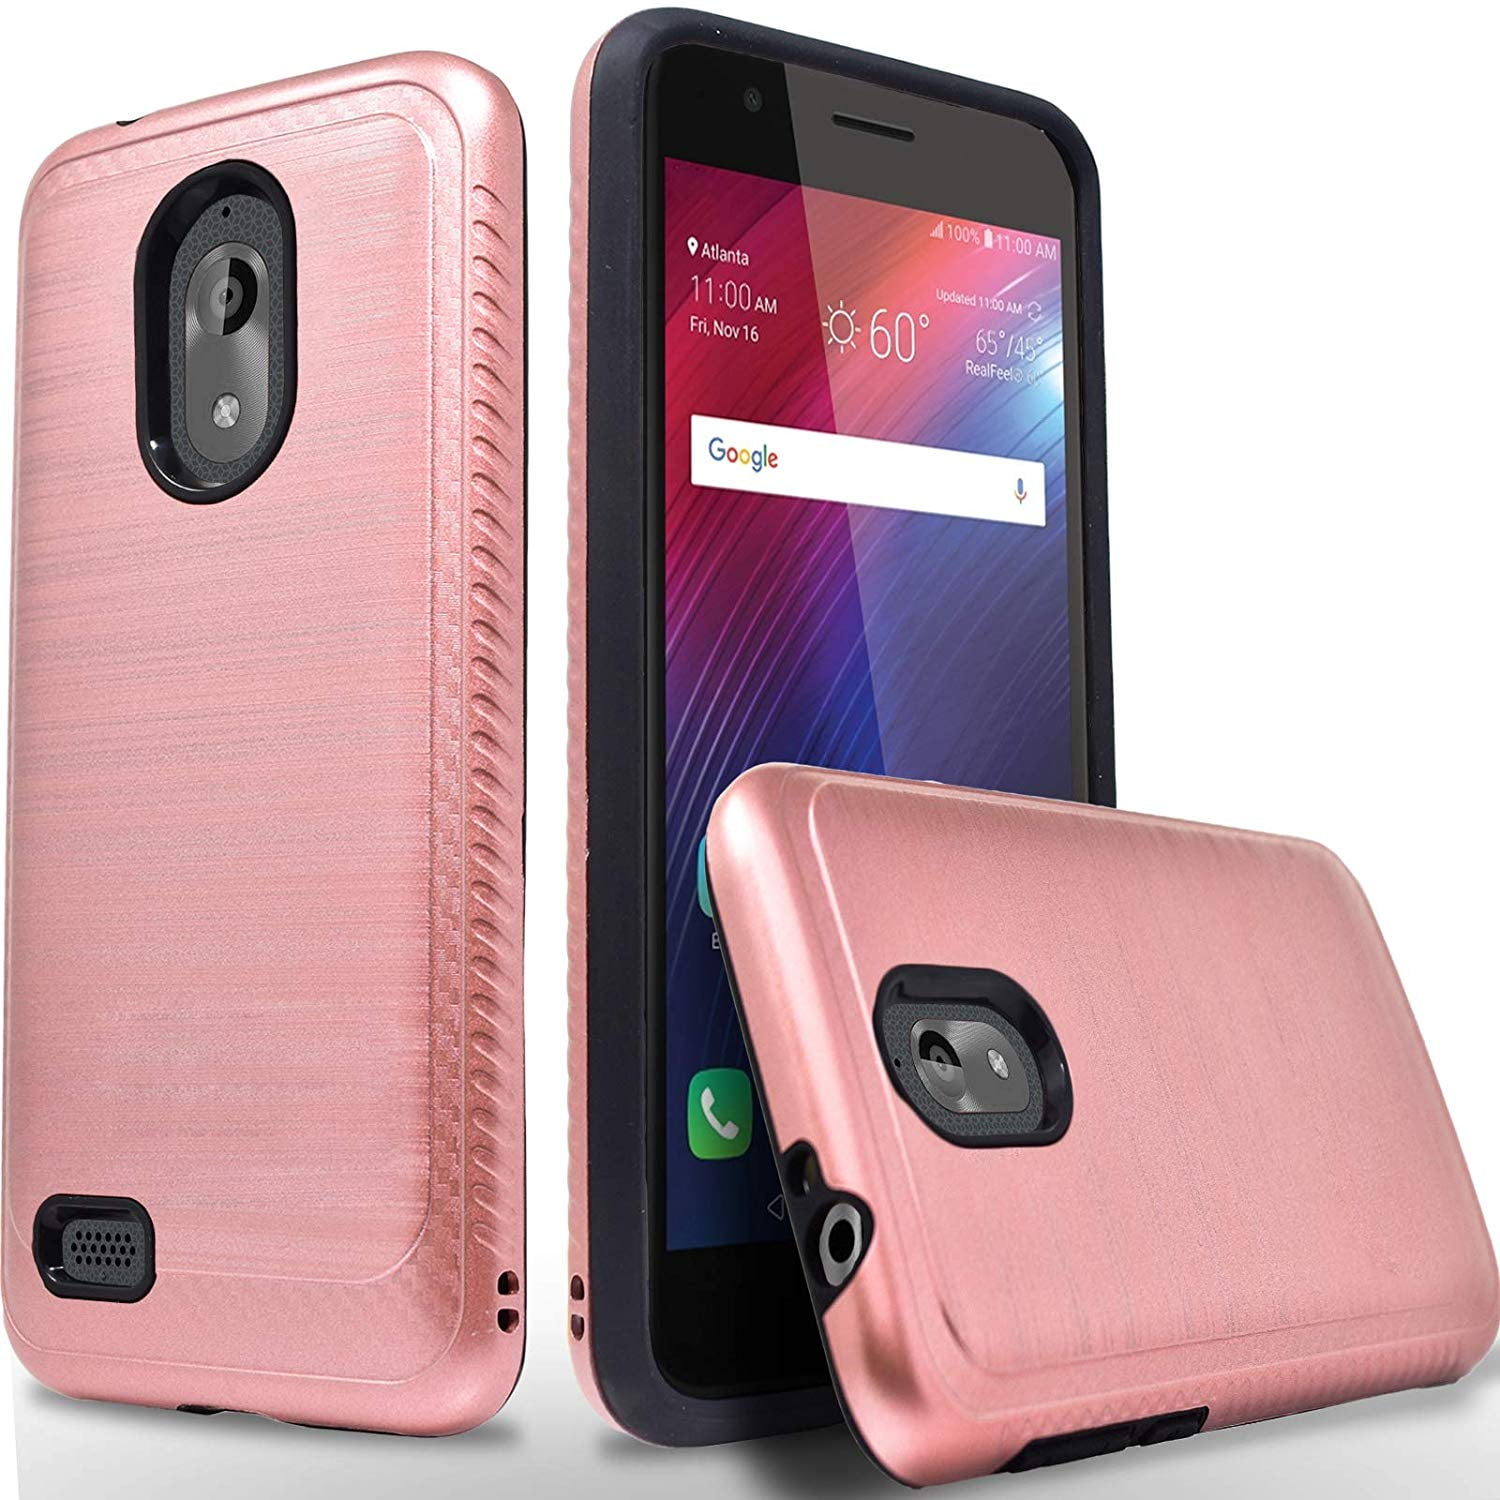 AT&T Axia QS5509A Case, 2-Piece Style Hybrid Shockproof Hard Case Cover